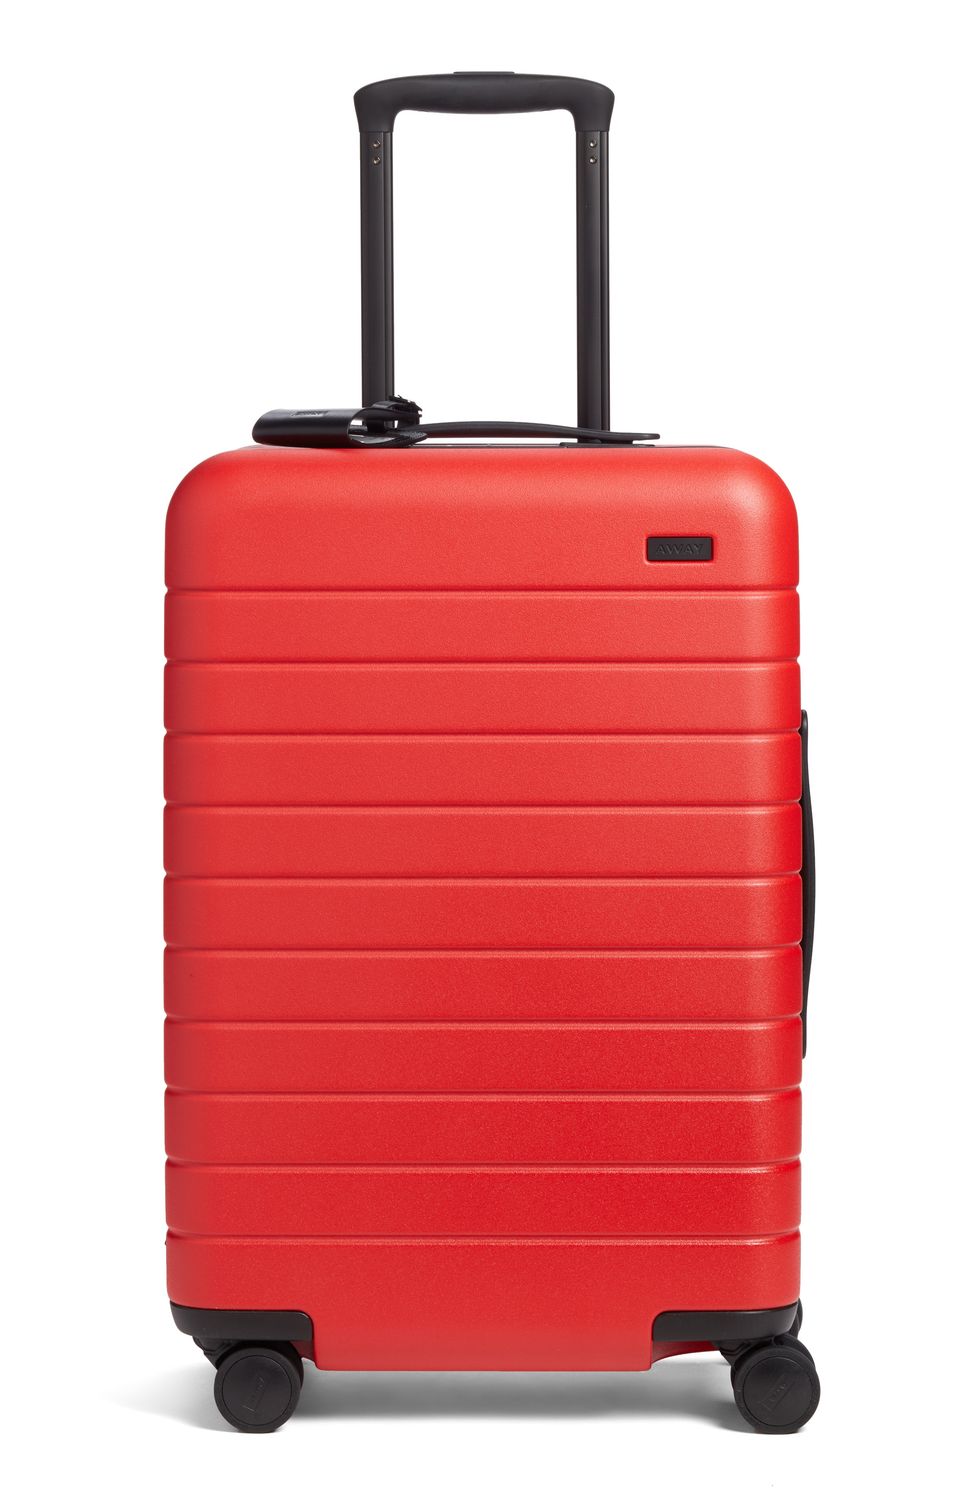 The Bigger Carry-On Hard Shell Suitcase in Red